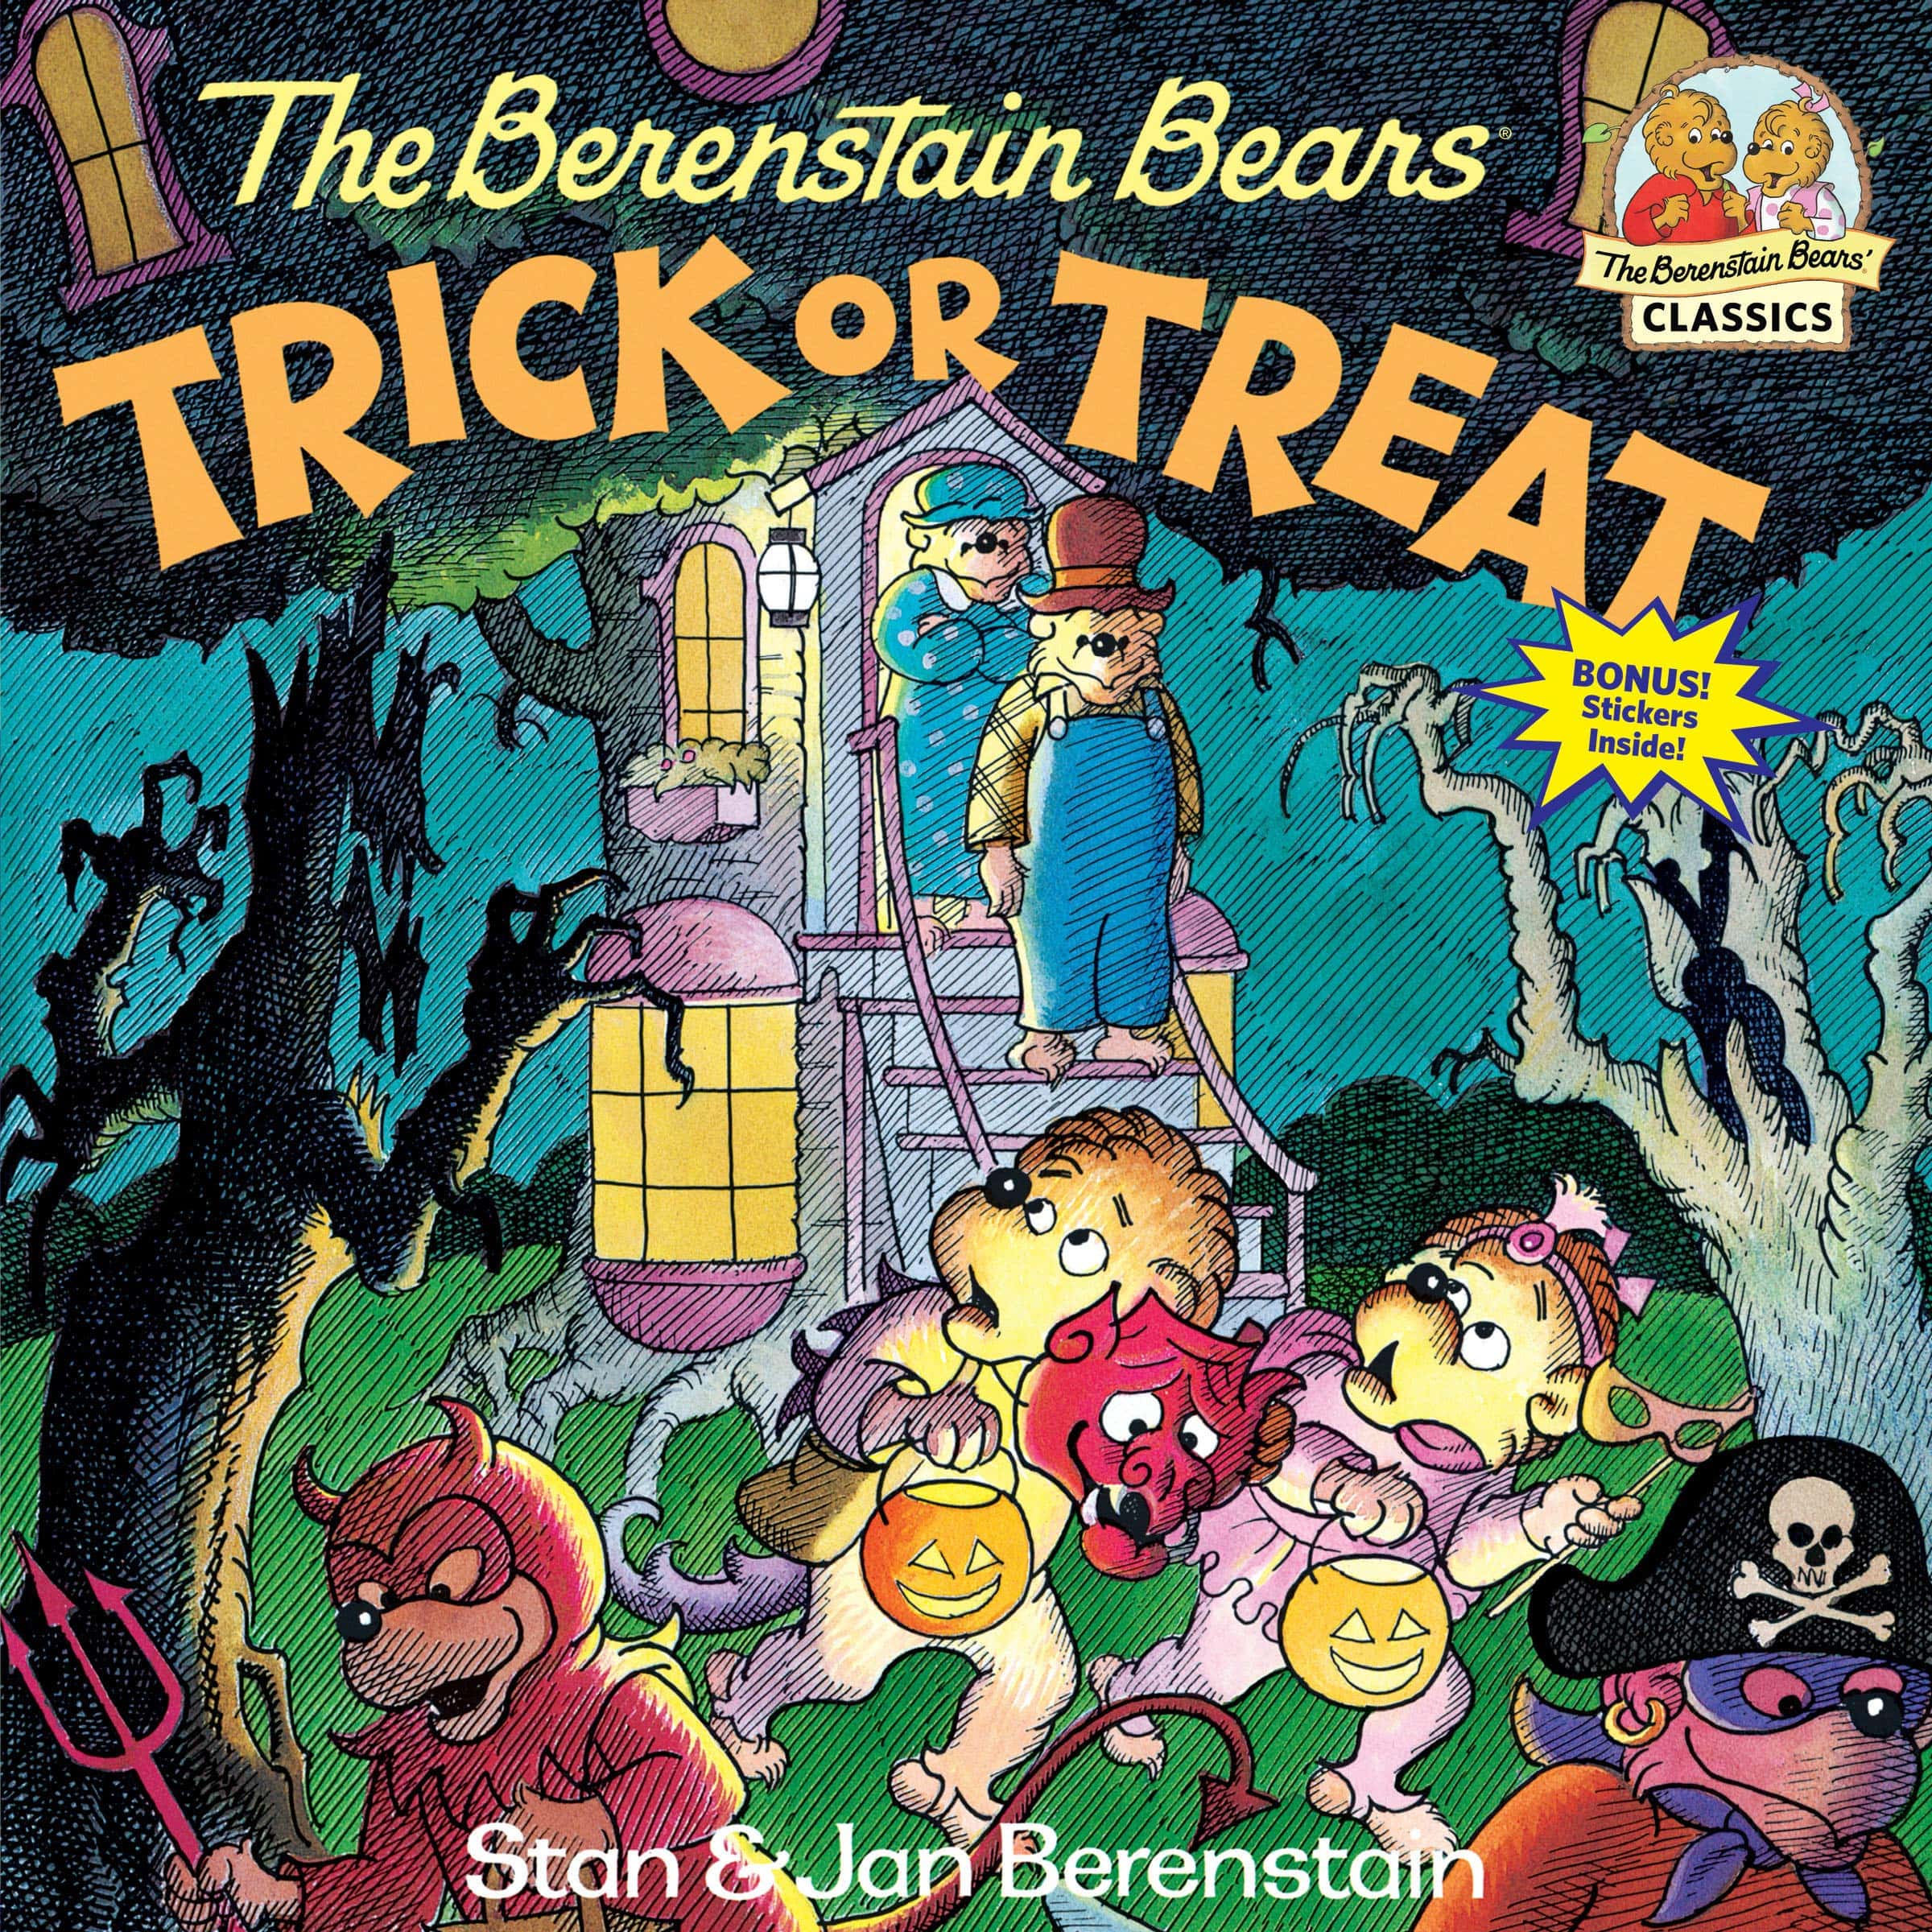 "The Berenstain Bears Trick or Treat" by Stan Berenstain